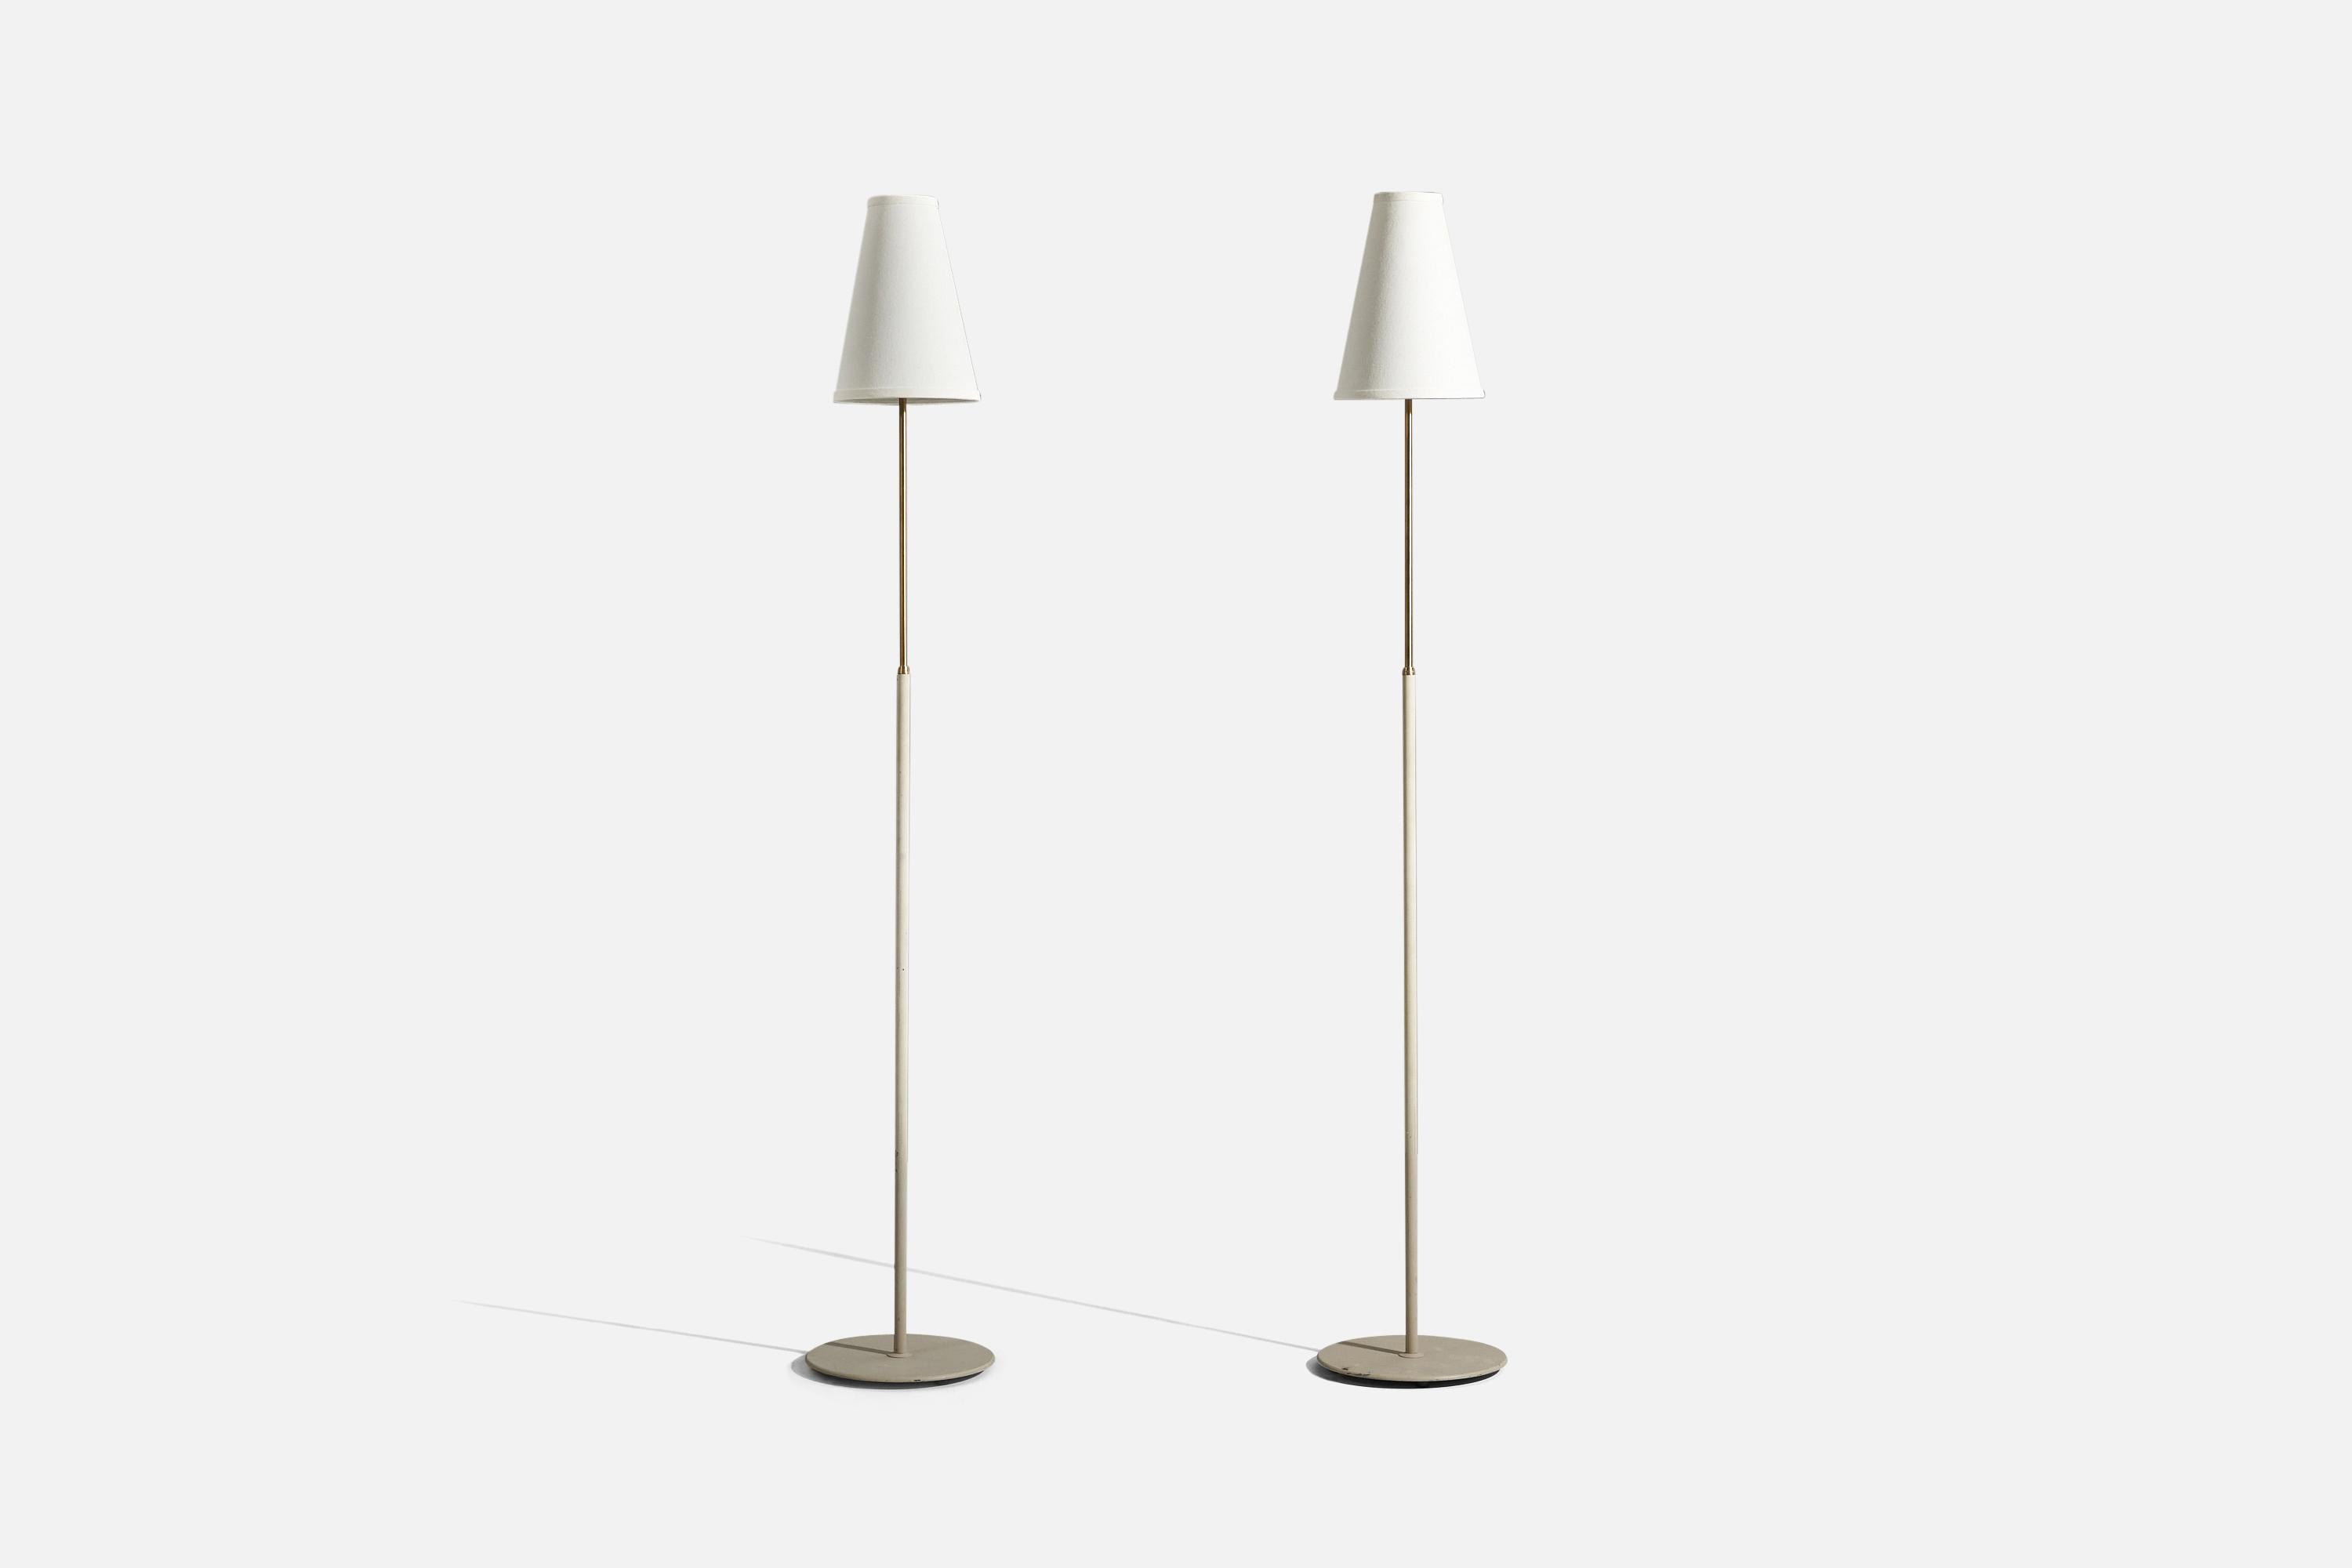 A pair of brass and lacquered metal floor lamps, designed and produced by ASEA, 1970s. 

Sold with lampshades.
Dimensions of floor Lamp (inches) : 52.25 x 9.5 x 9.5 (H x W x D)
Dimensions of shade (inches) : 3.25 x 7.25 x 10 (T x B x